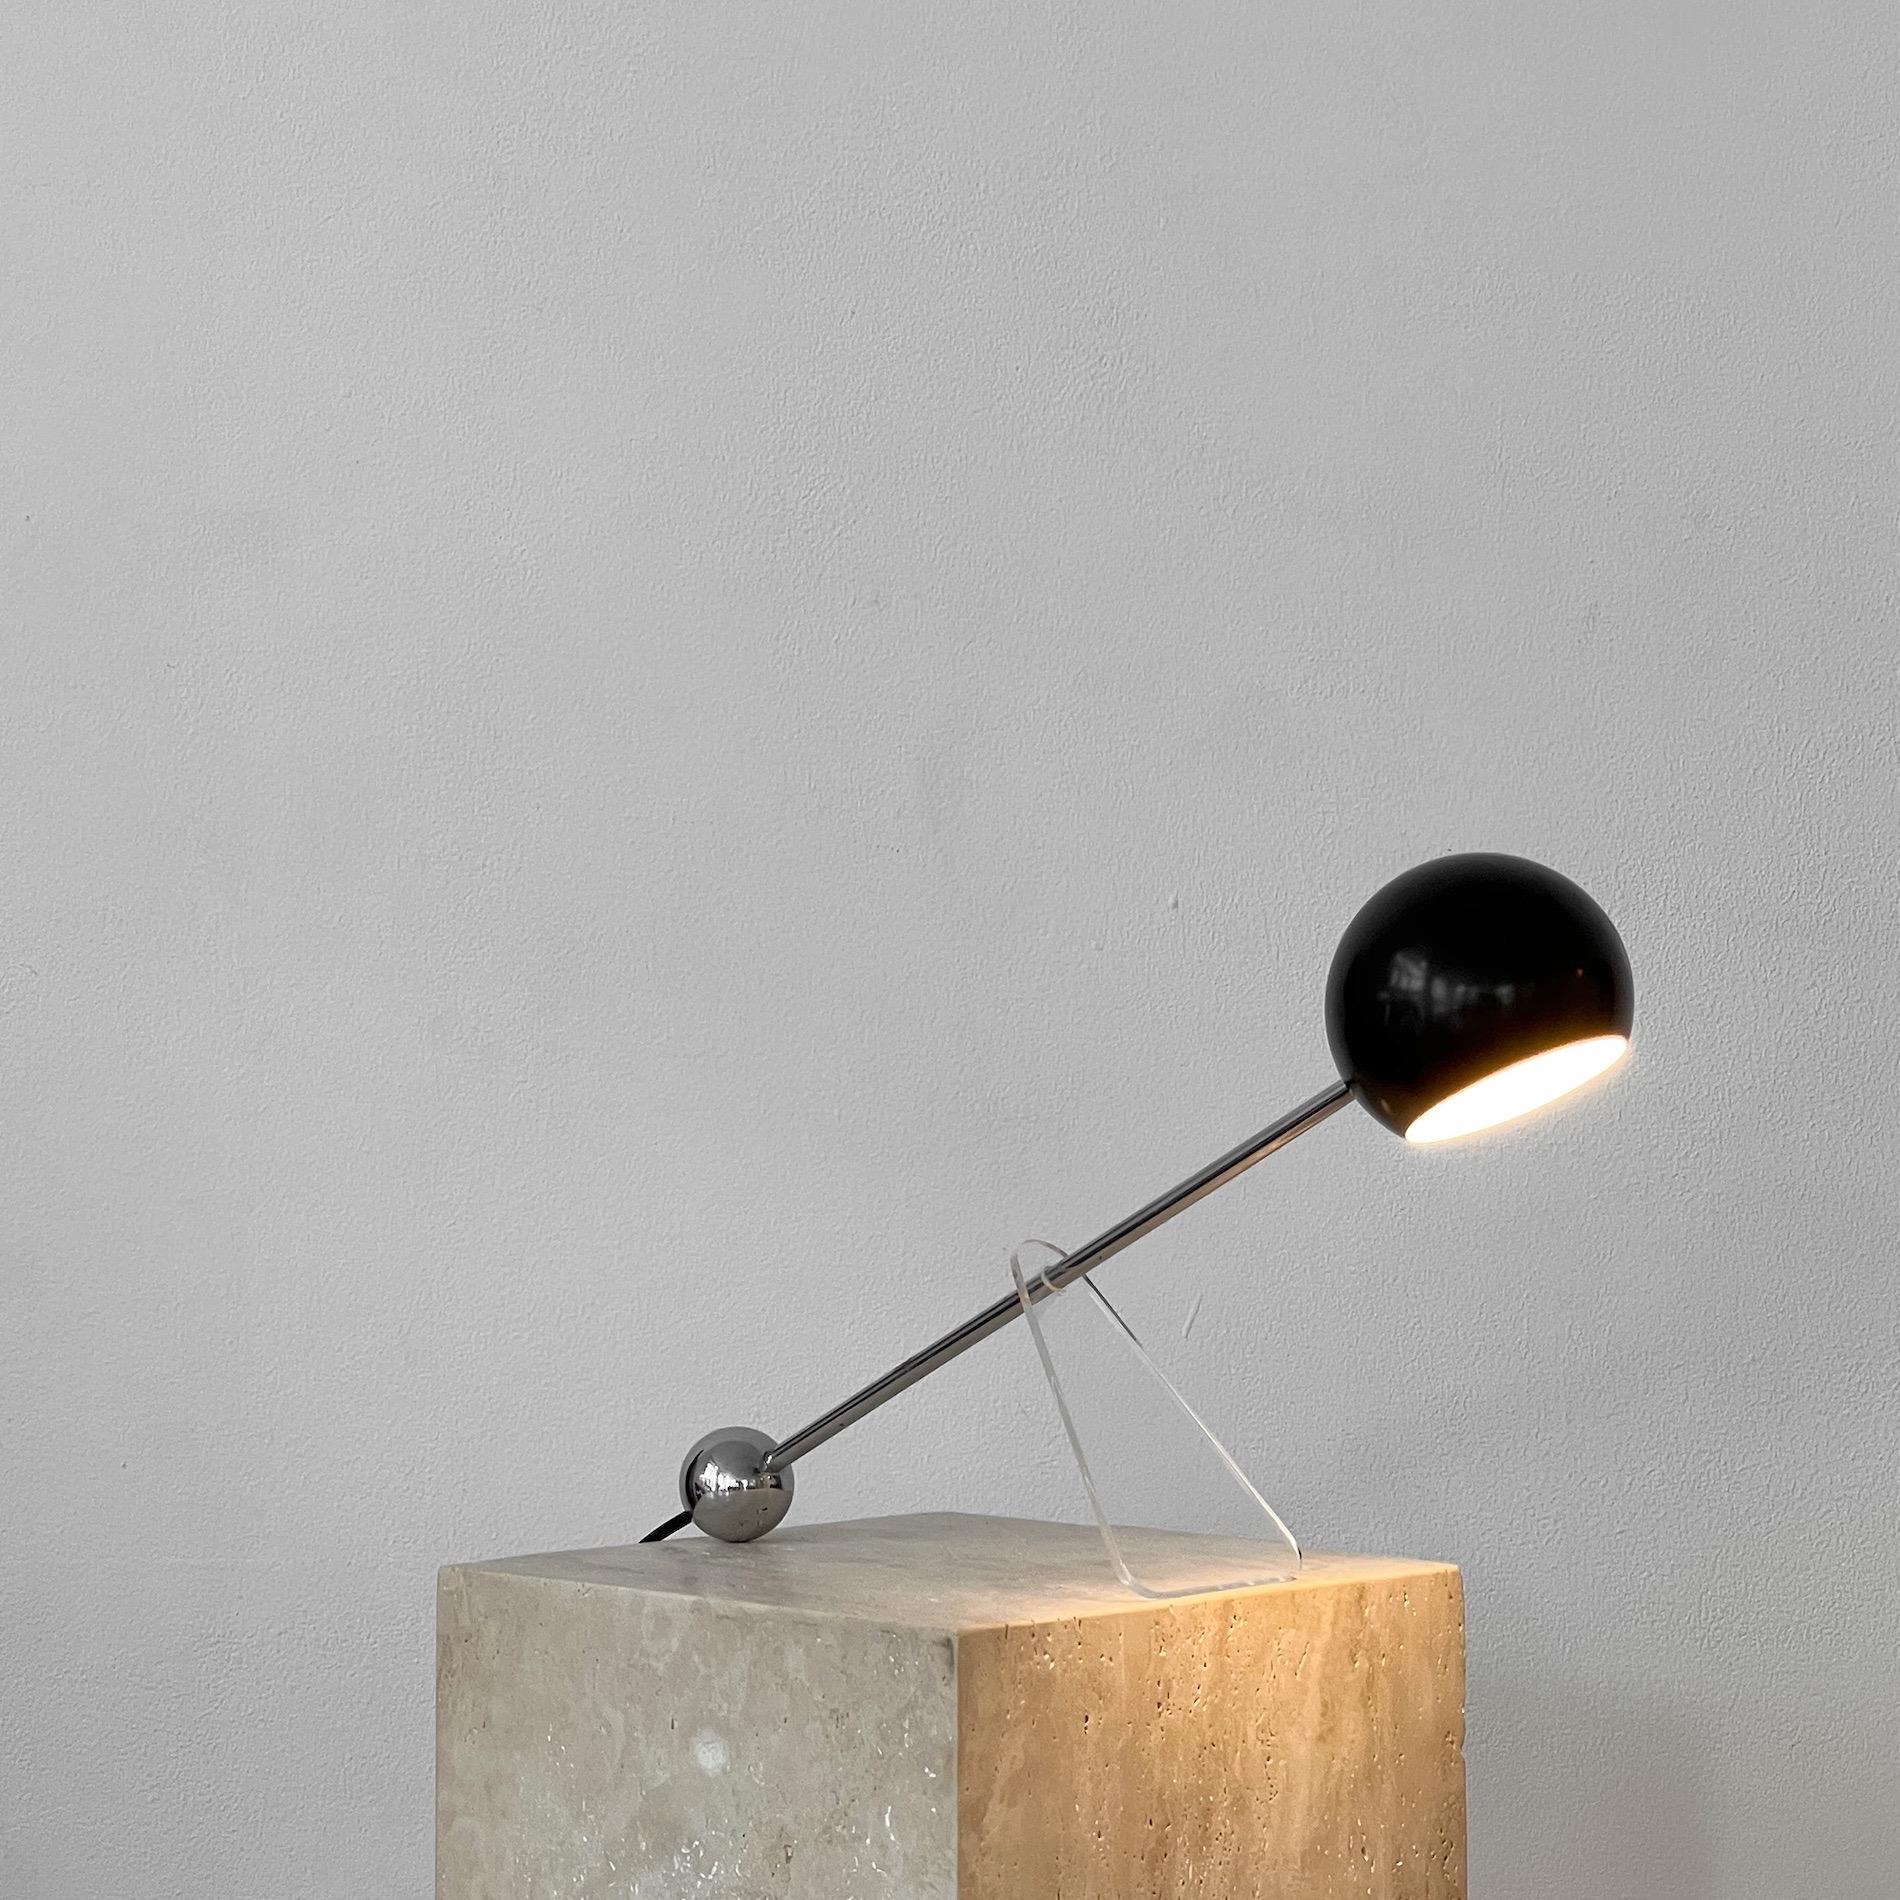 This desk lamp was designed in the 1980s. It is related to the work of Yonel Lebovici. This French designer was known for his abstract, organic and often stylized designs. He made innovative use of modern materials such as metal and acrylic